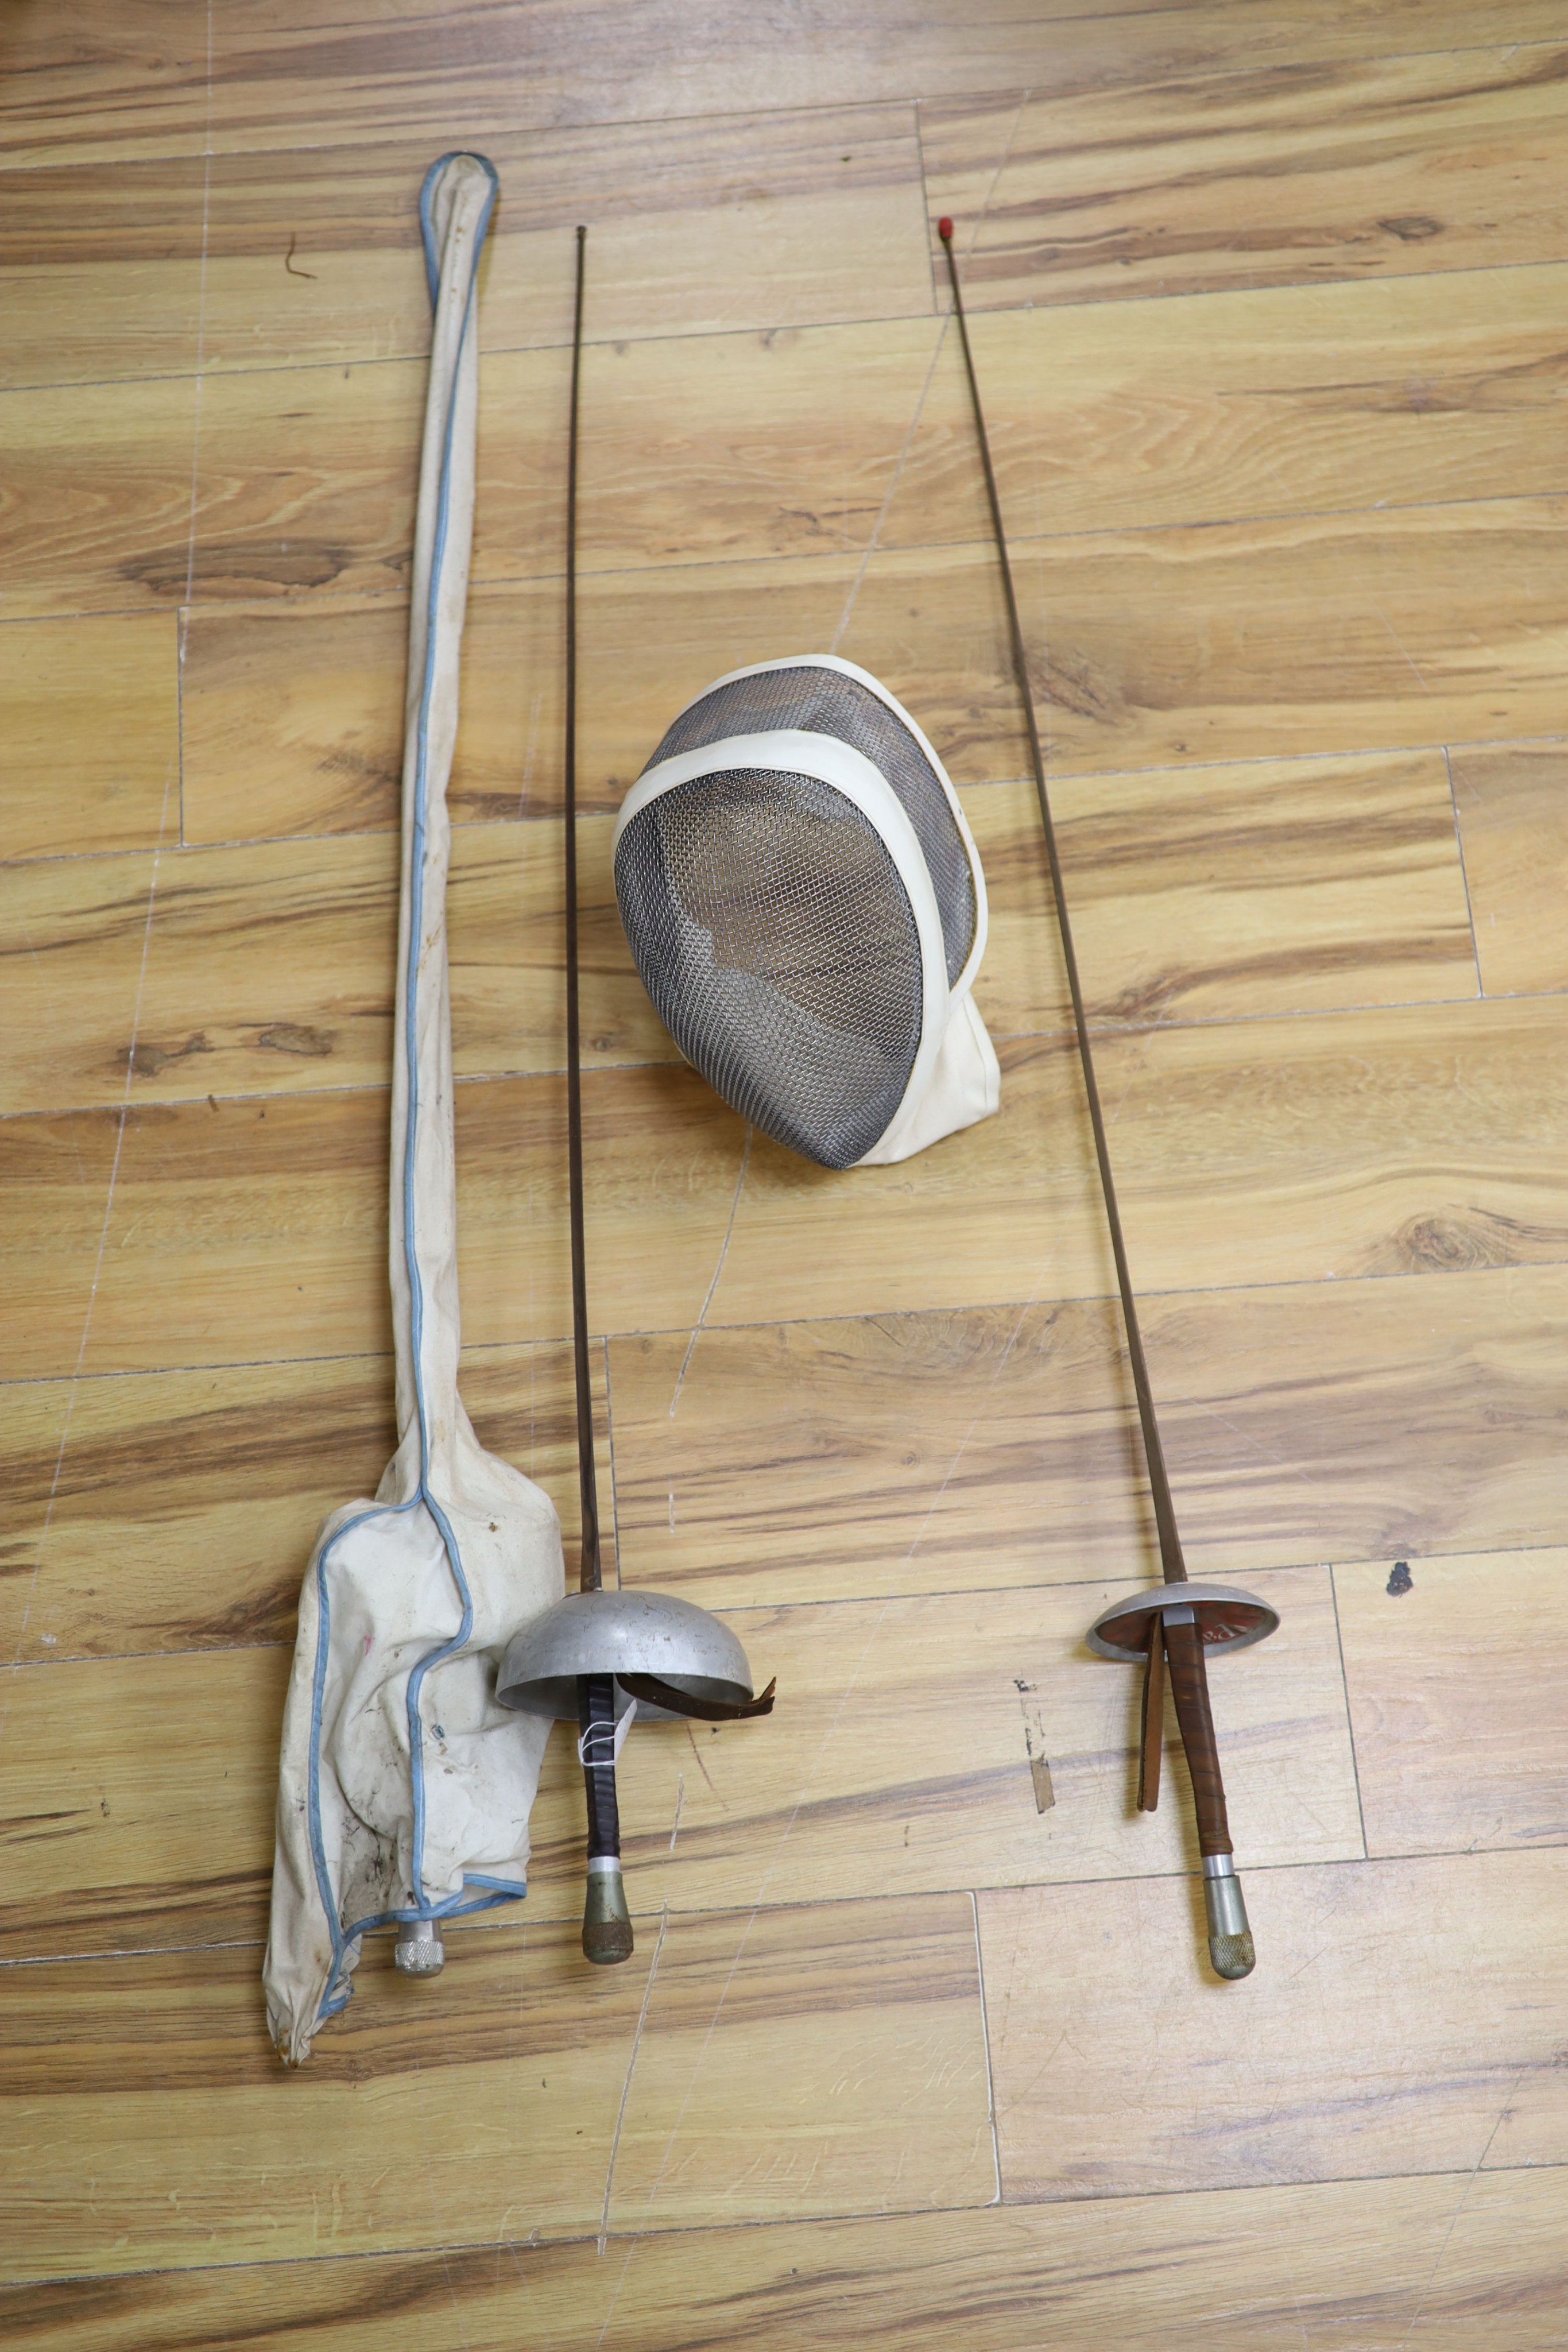 A fencing foil and accessories